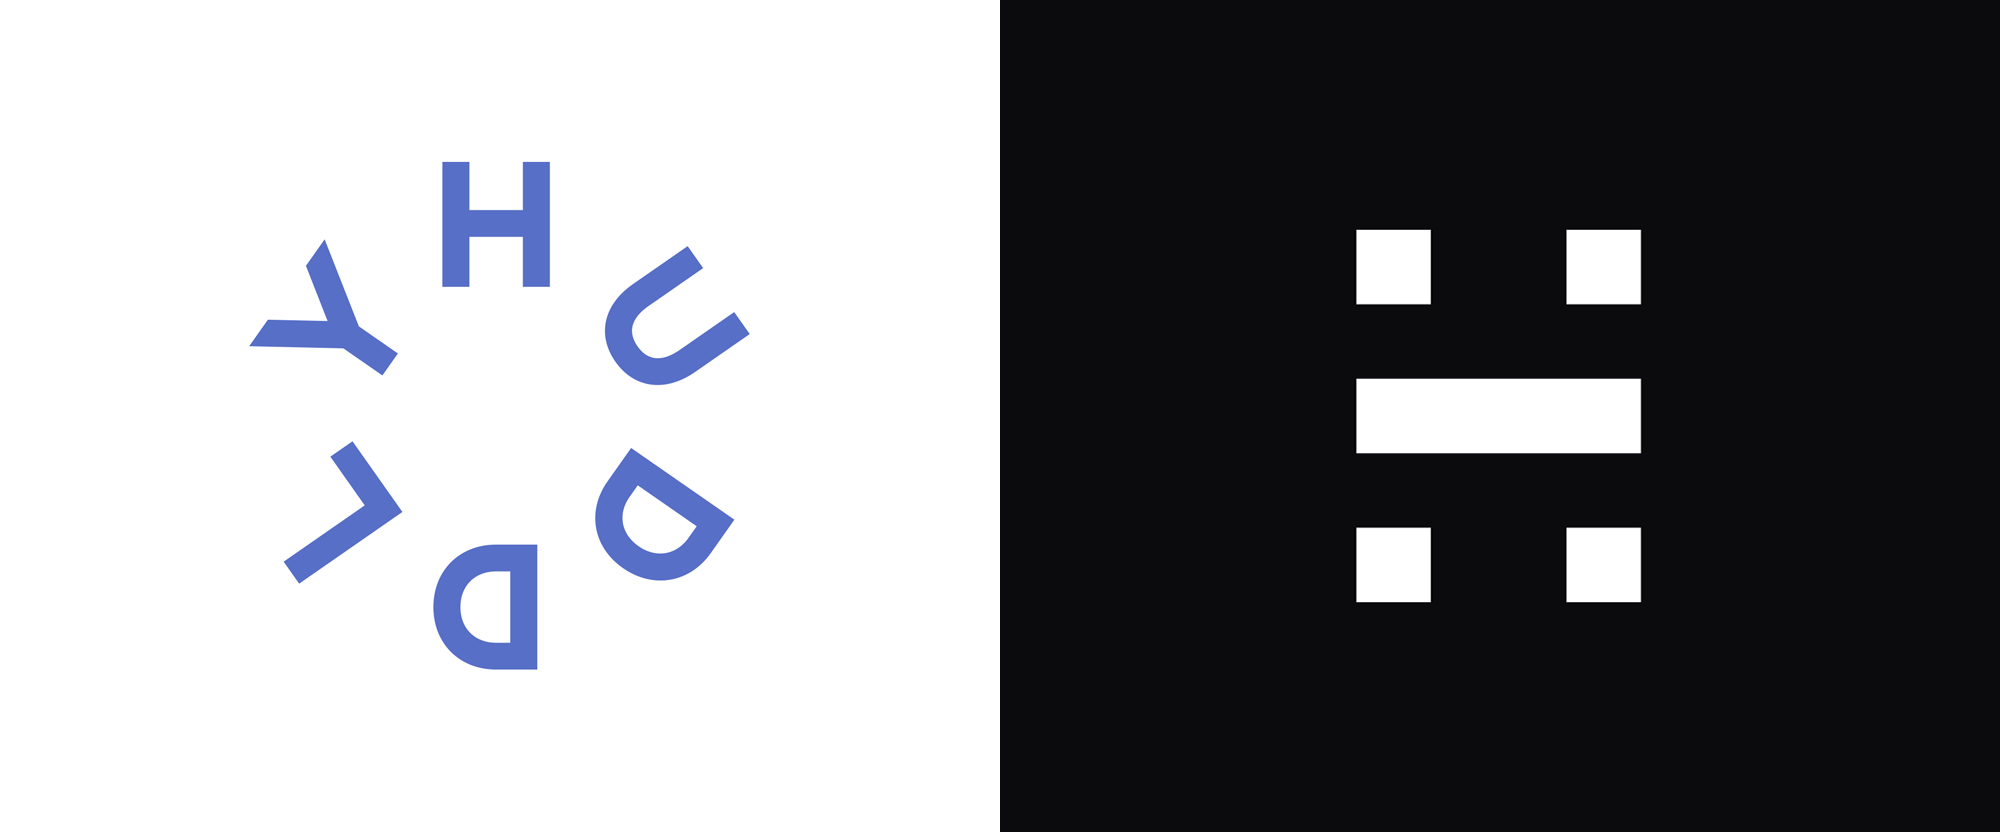 Follow-up: New Logo and Identity for Huddly by Heydays